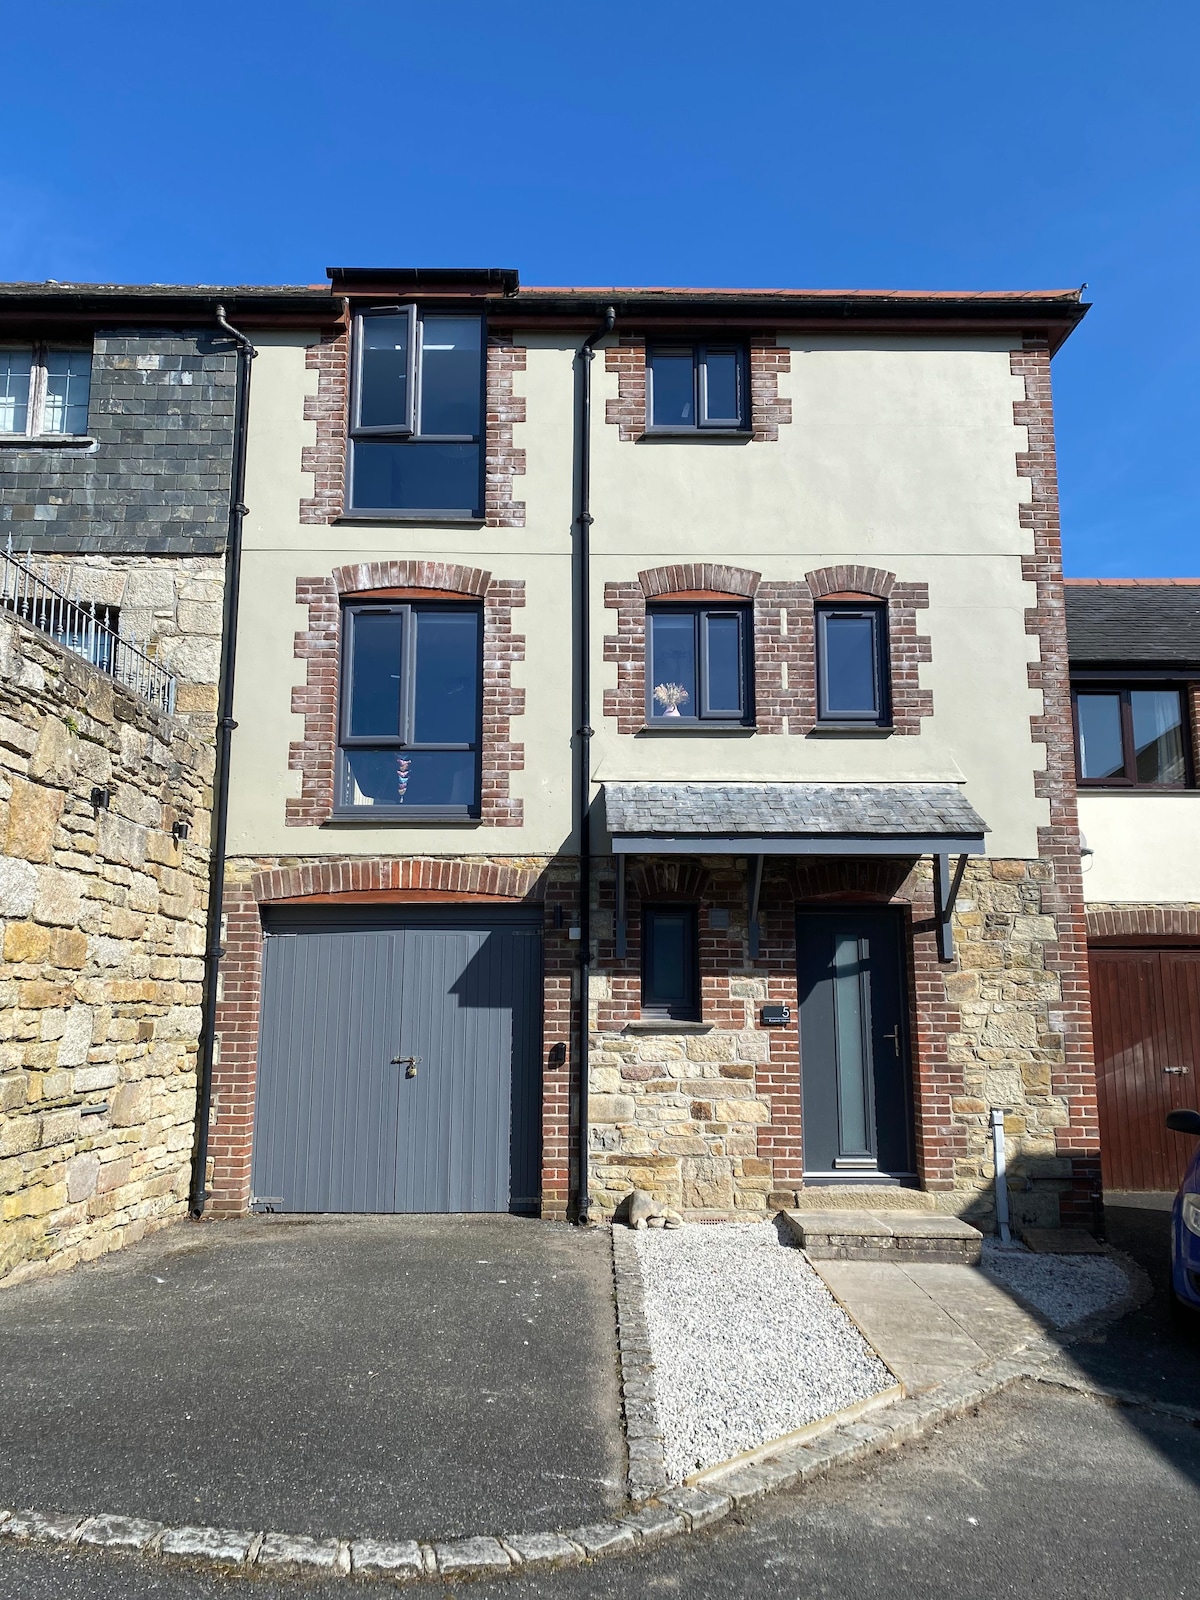 4 Bedroom House In Lovely Cornish Town